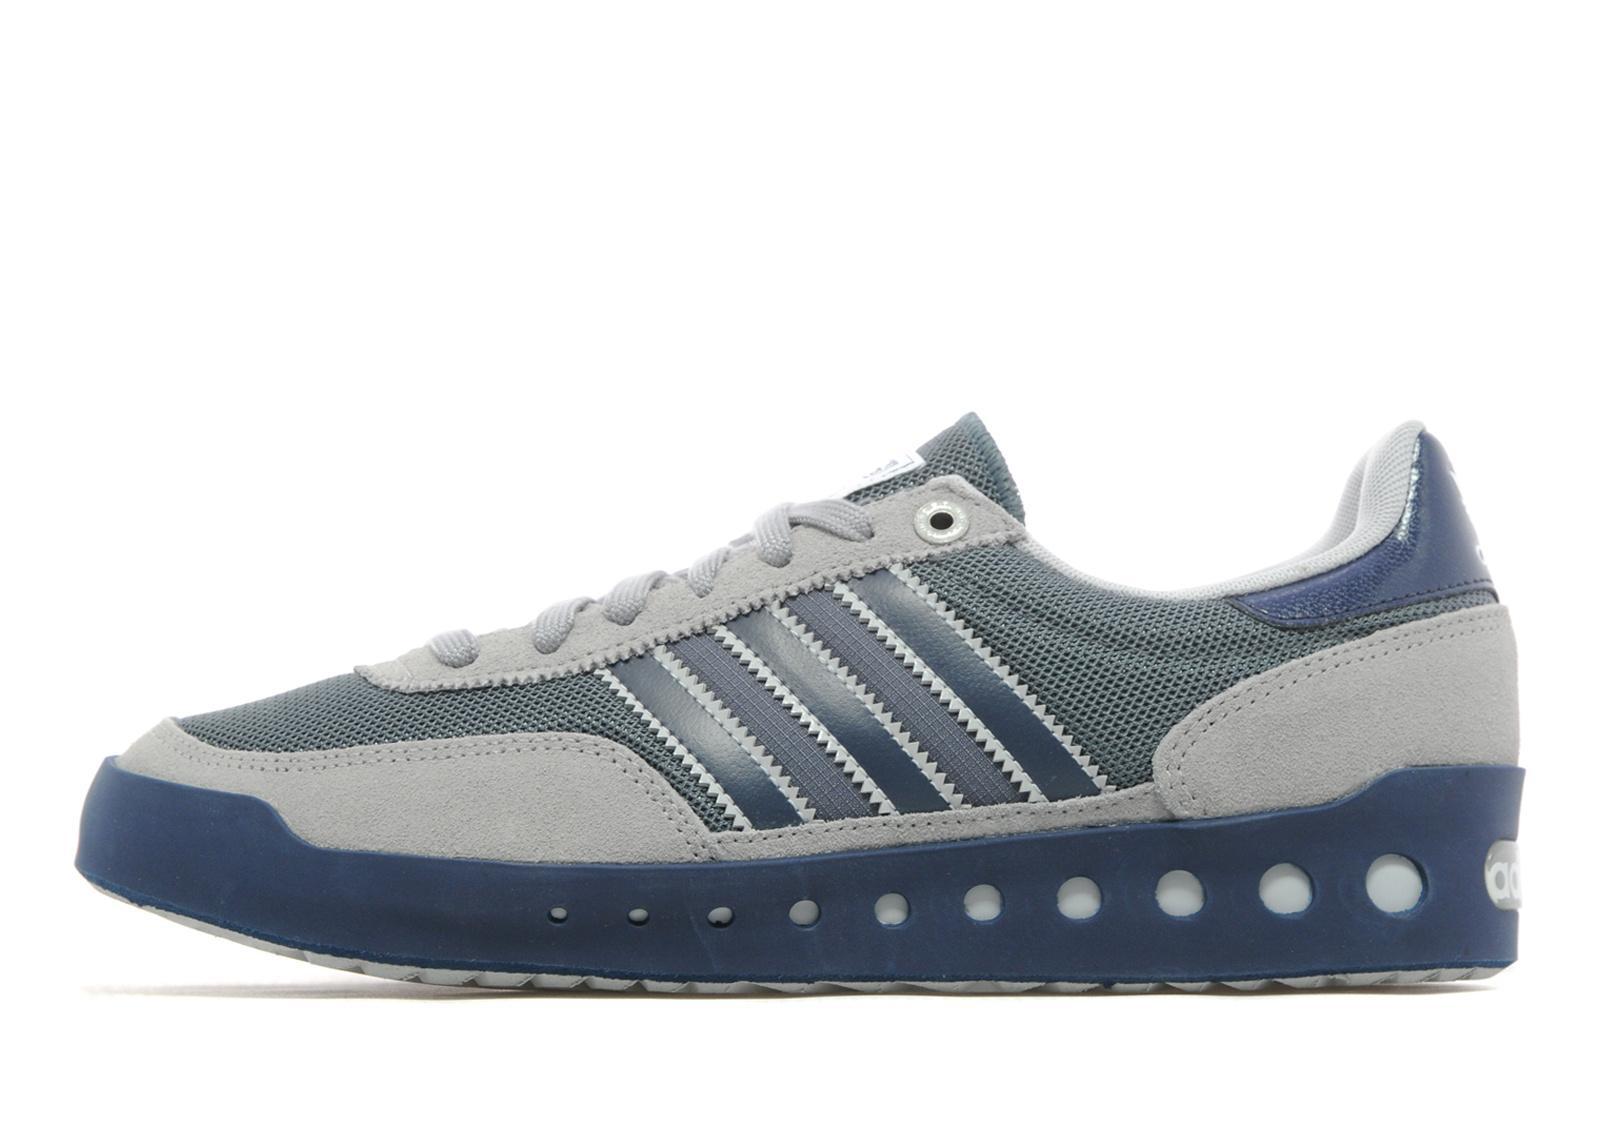 adidas pt trainers for sale Off 57% - www.sbs-turkey.com